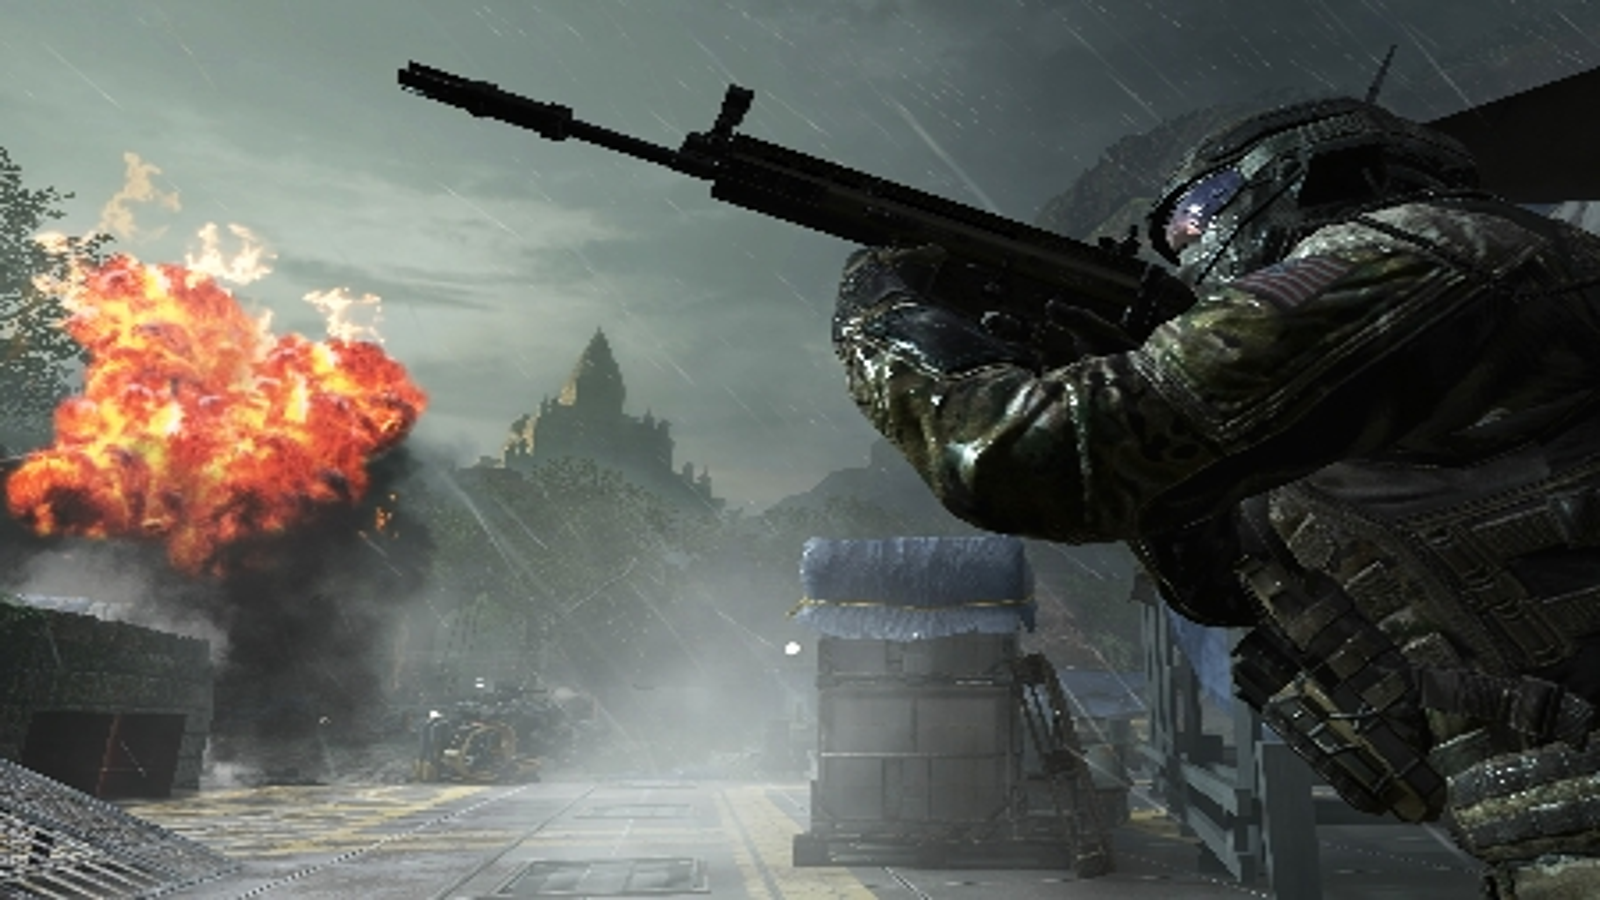 Call of Duty: Black Ops 2': Everything you need to know - Polygon